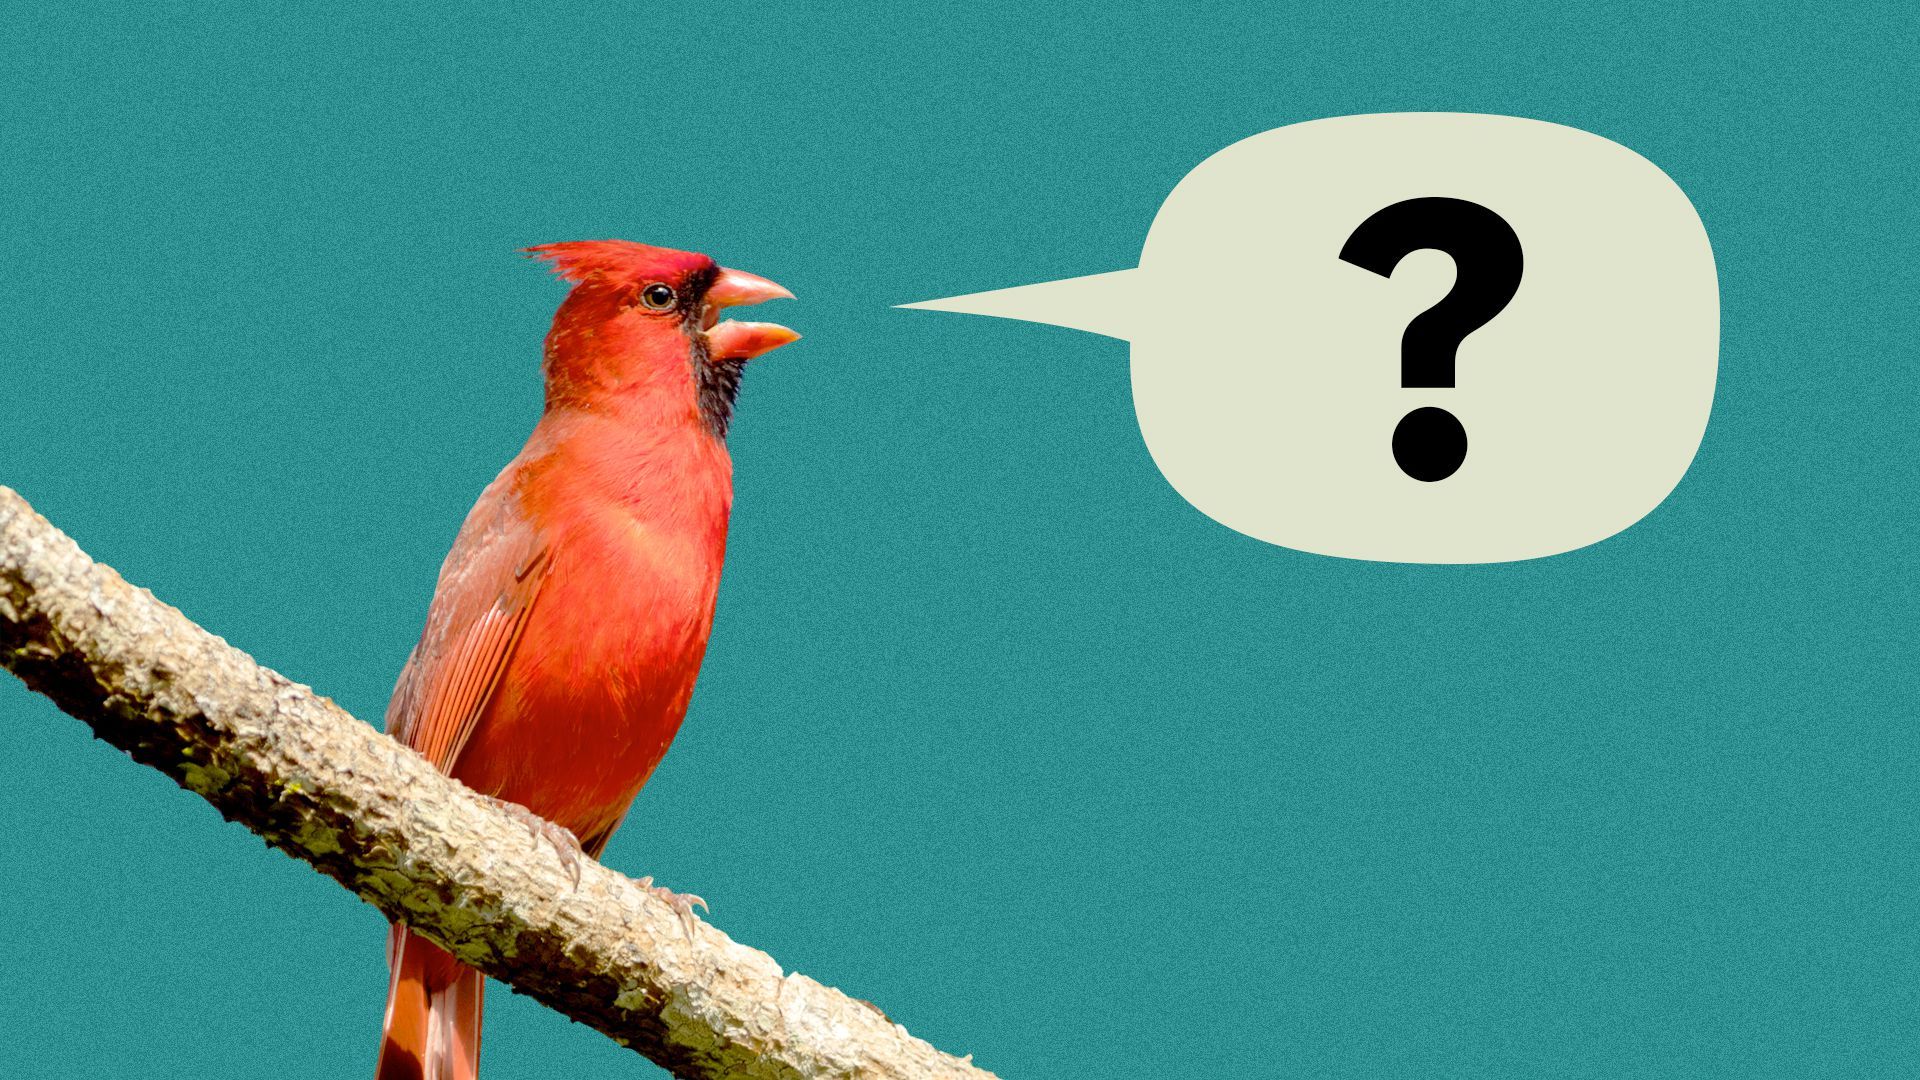 Illustration of a cardinal sitting on a branch with a word balloon with a question mark coming out of its mouth.